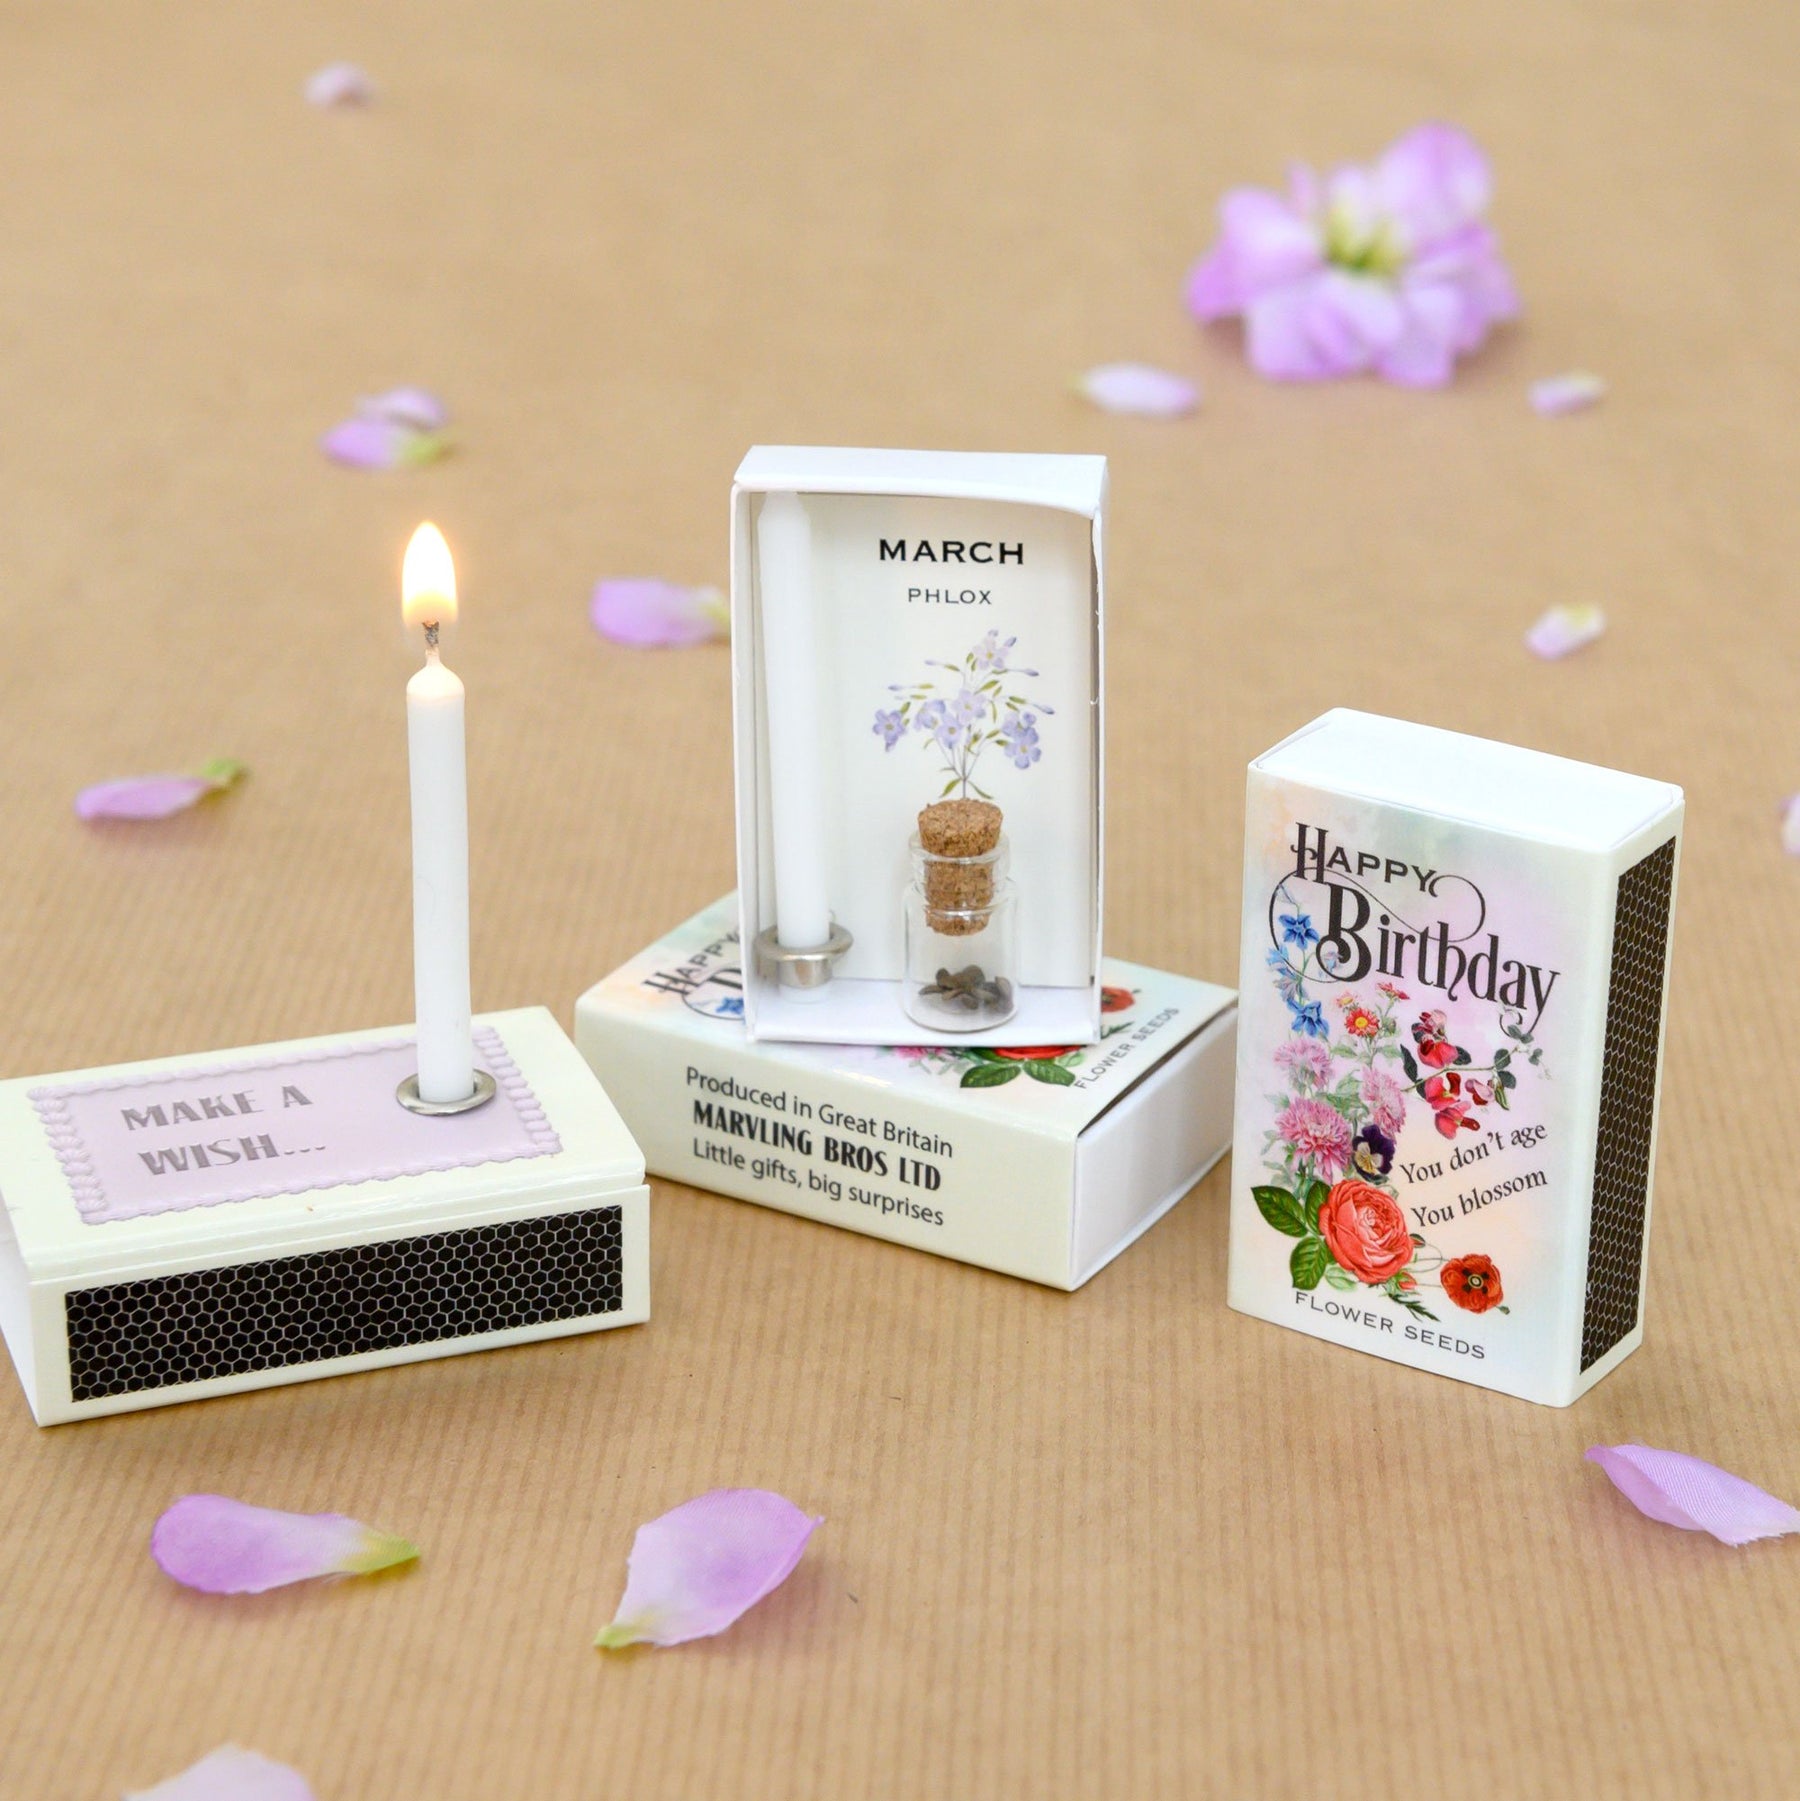 March Birth Flower Phlox Seeds And Birthday Candle Gift